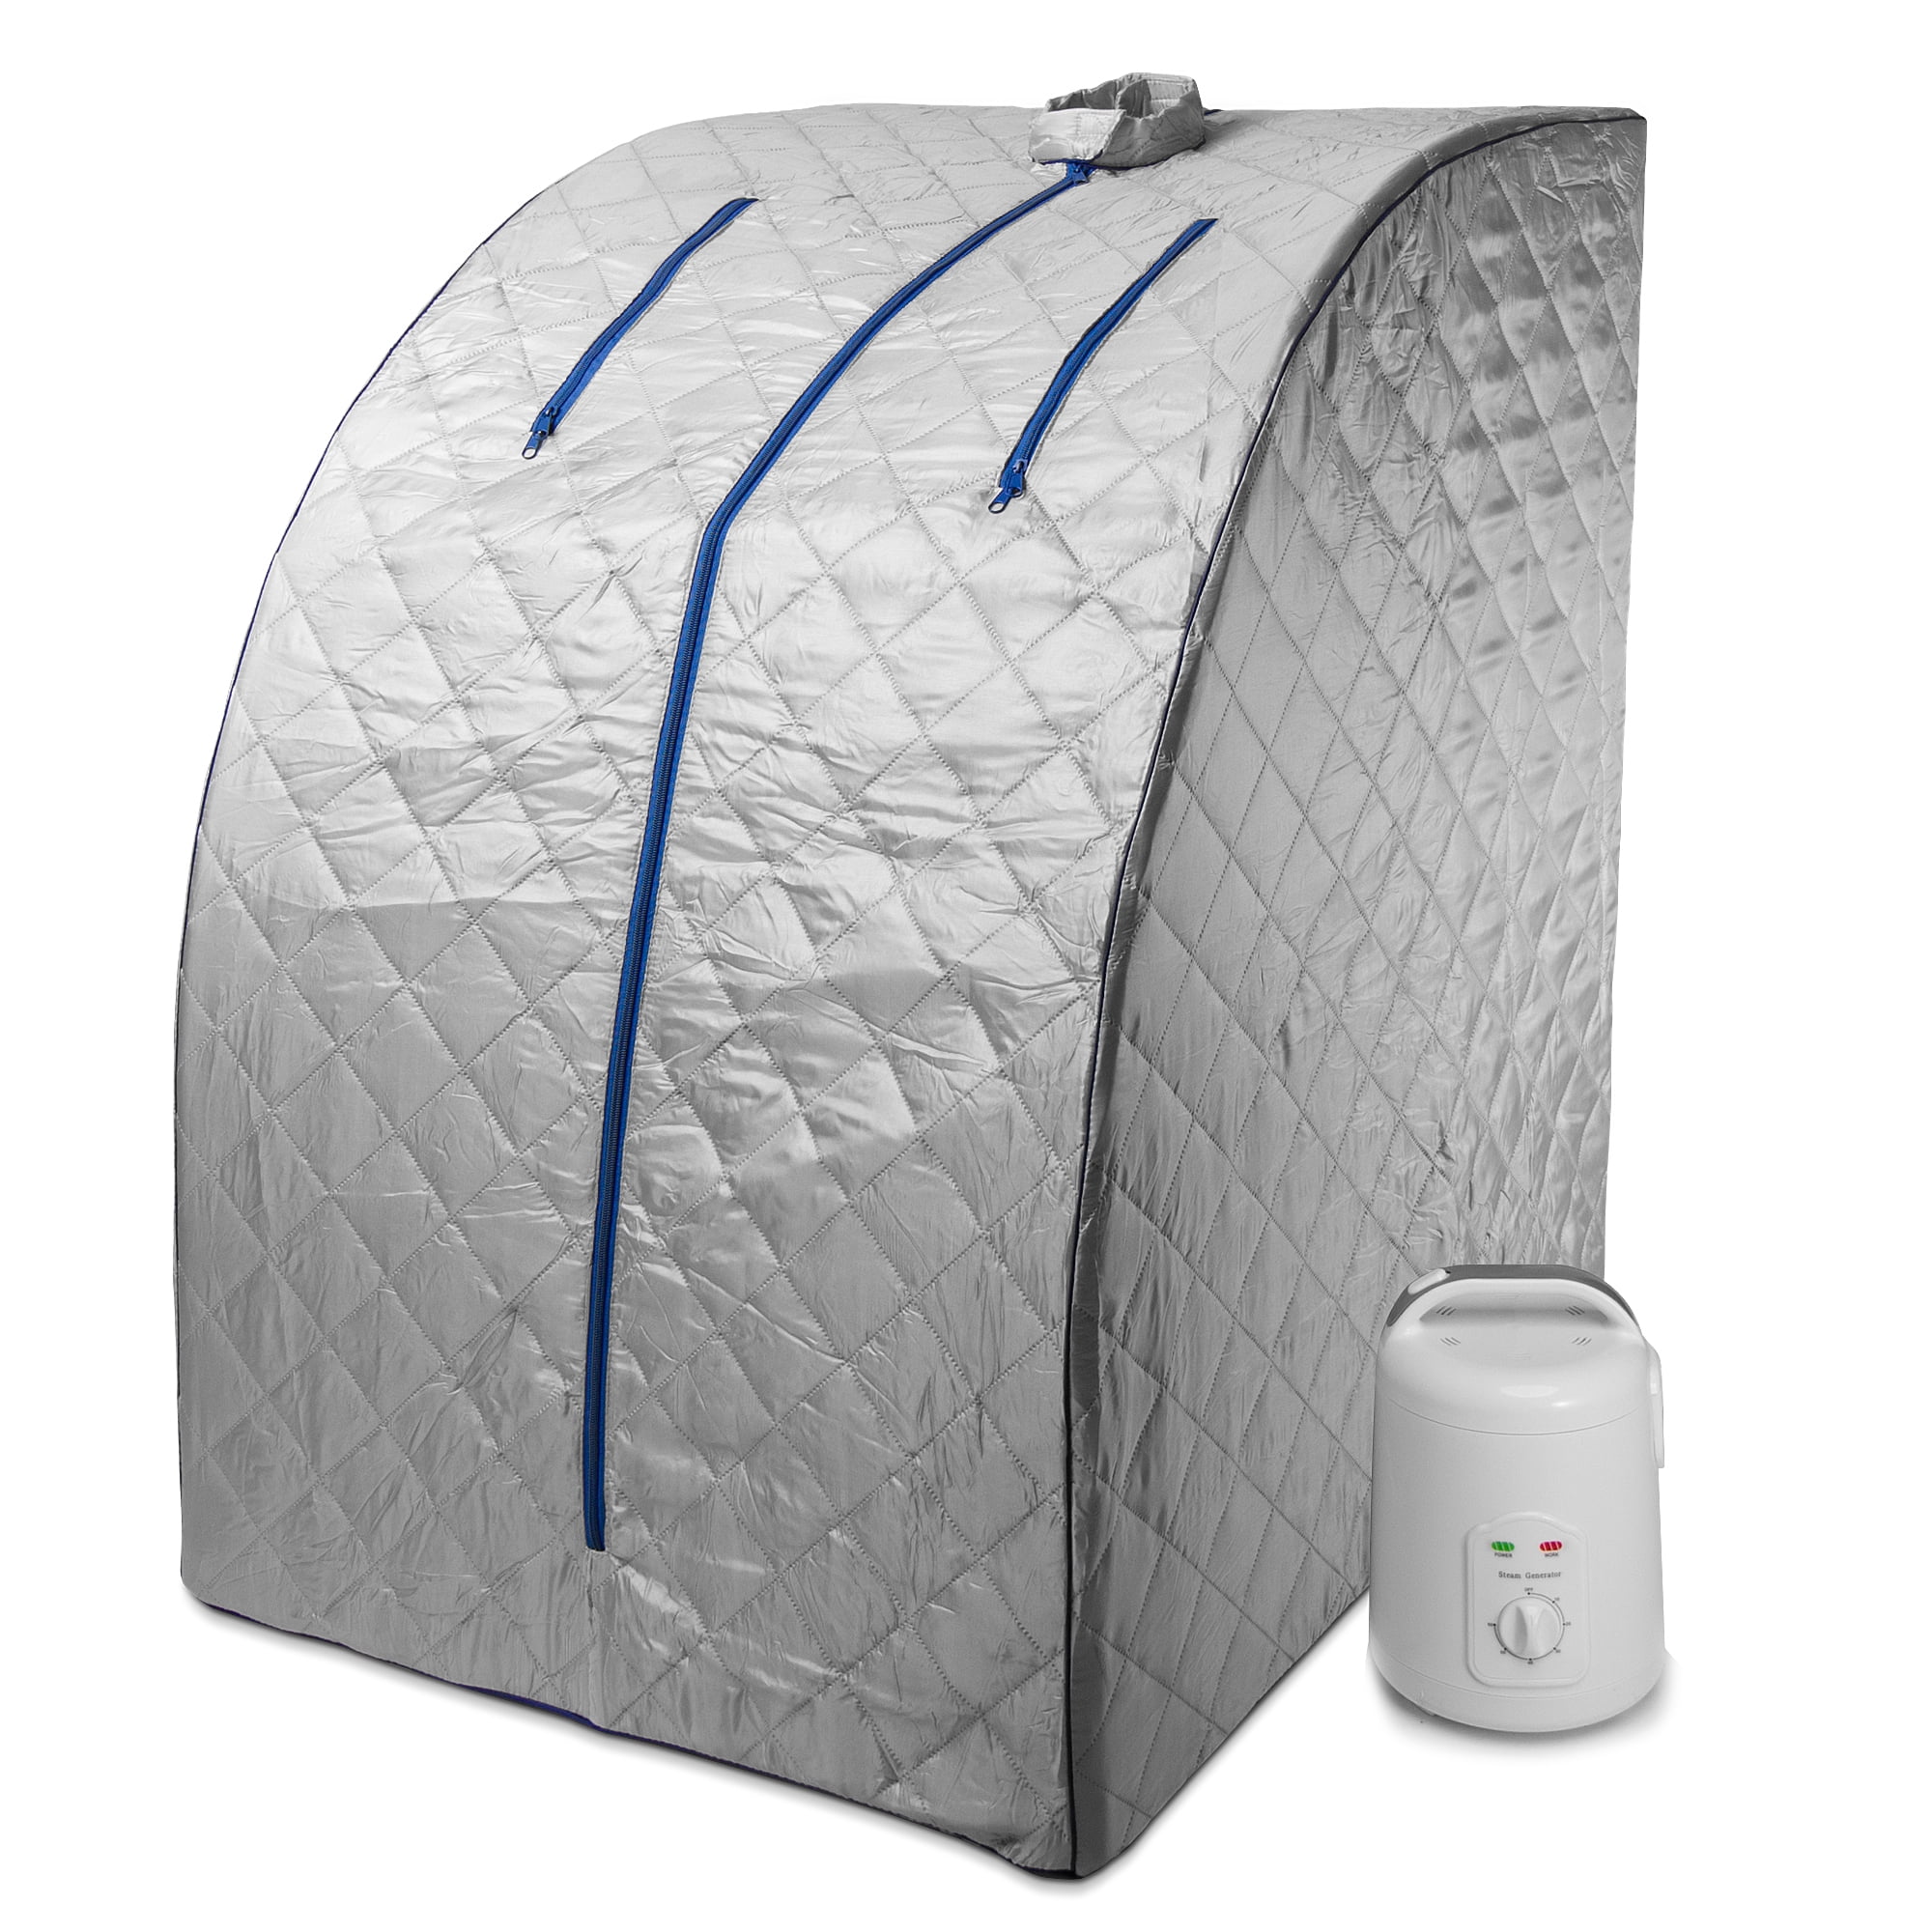 Details about   Portable Steam Sauna Home Full Body Spa Tent Steamer Weight Loss Detox 2 B 52 